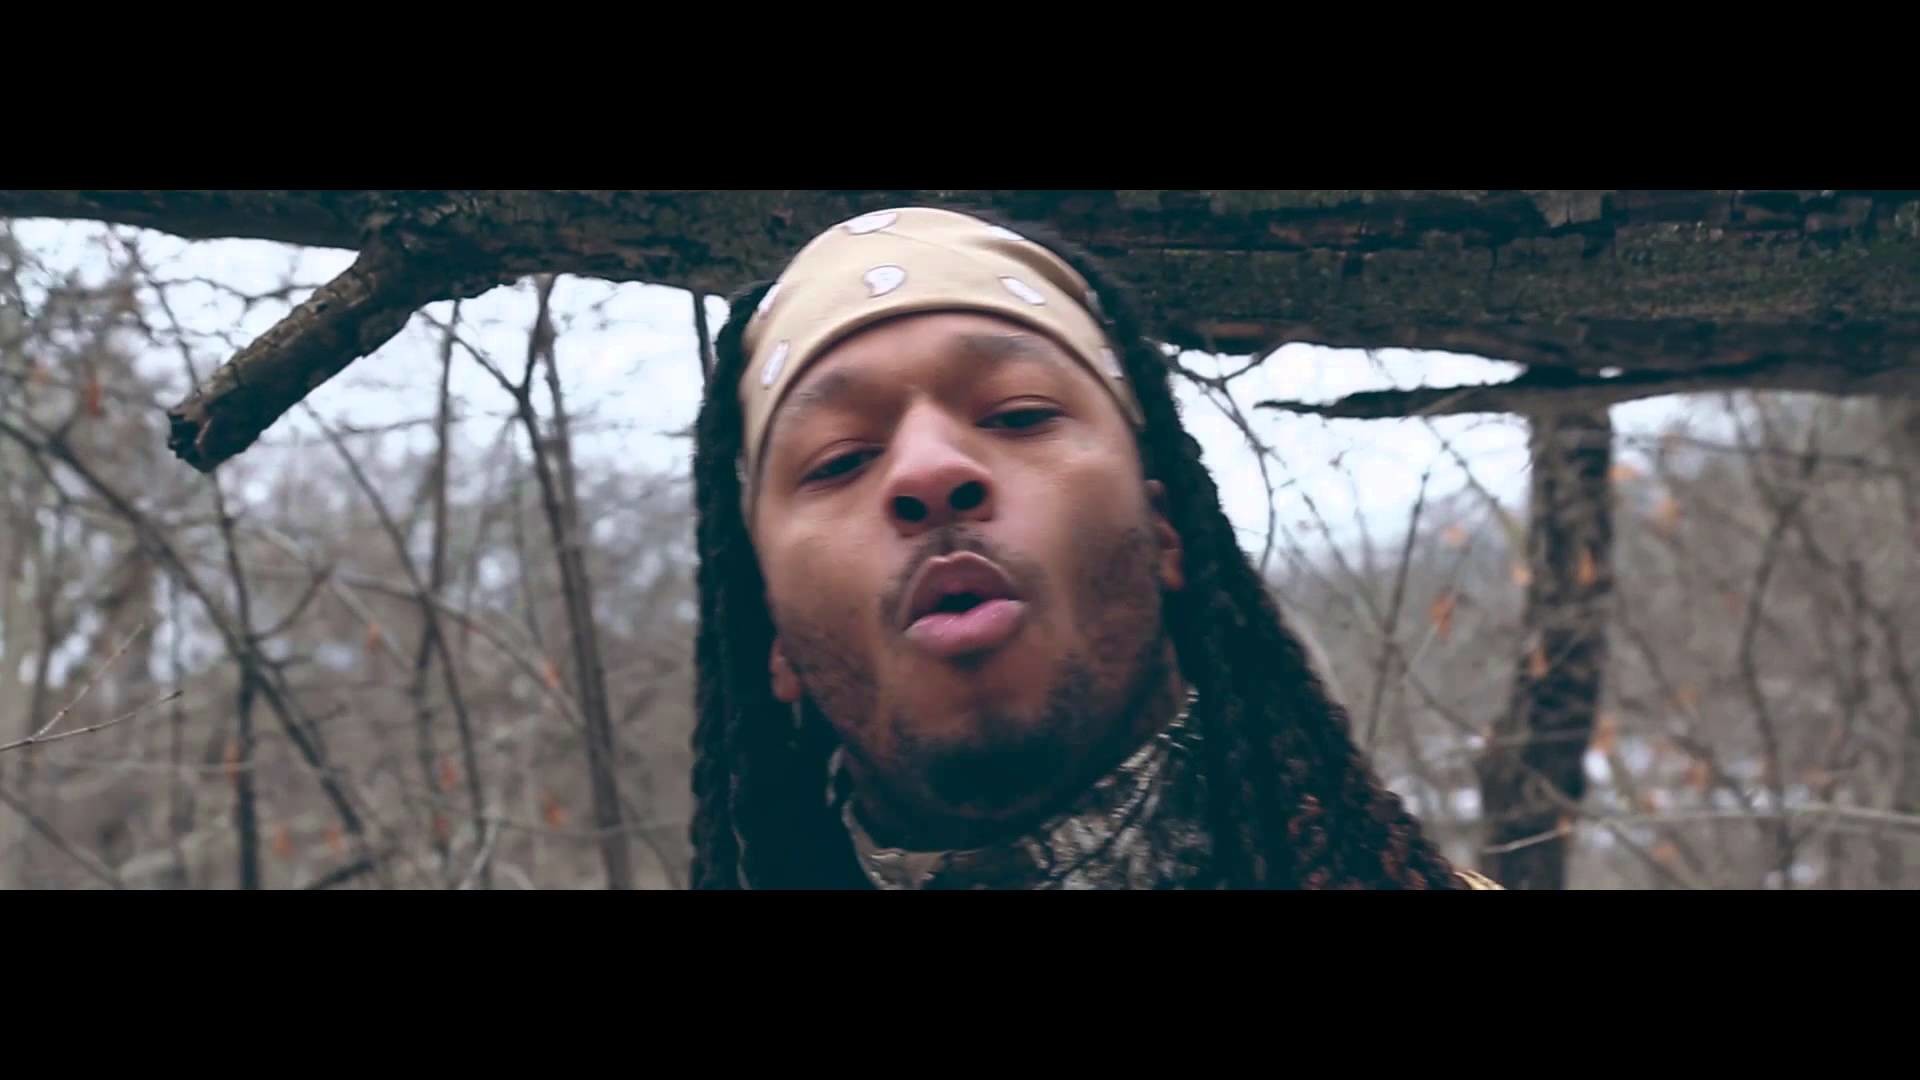 1920x1080 Montana of 300 - Planet of the Apes ft. Talley of 300